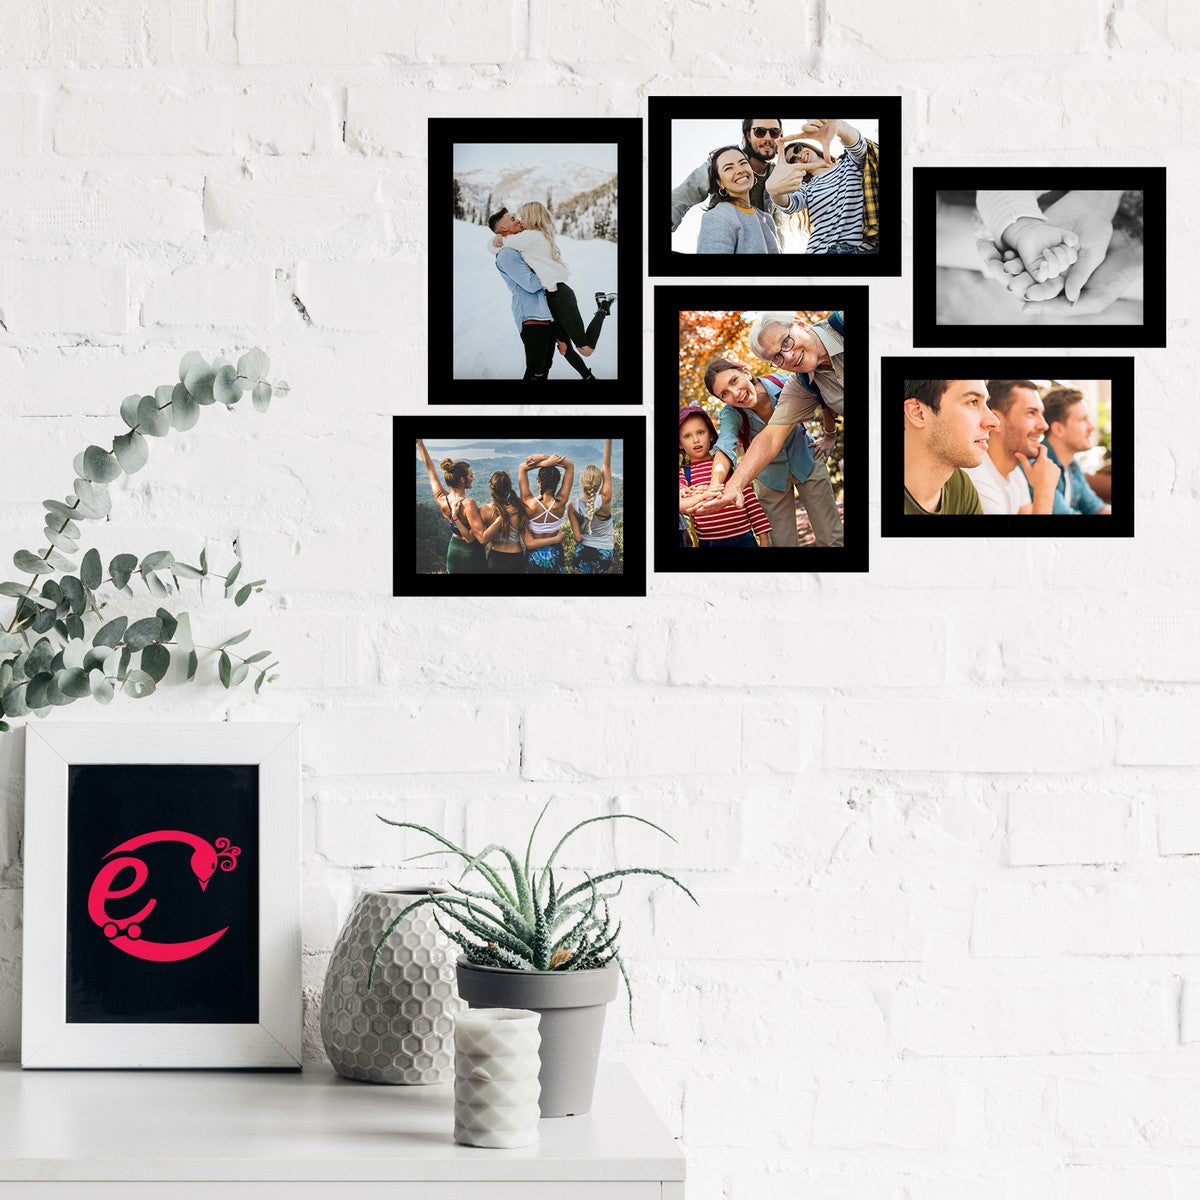 Memory Wall Collage Photo Frame - Set of 6 Photo Frames for 4 Photos of 5"x7", 2 Photos of 6"x8" 1